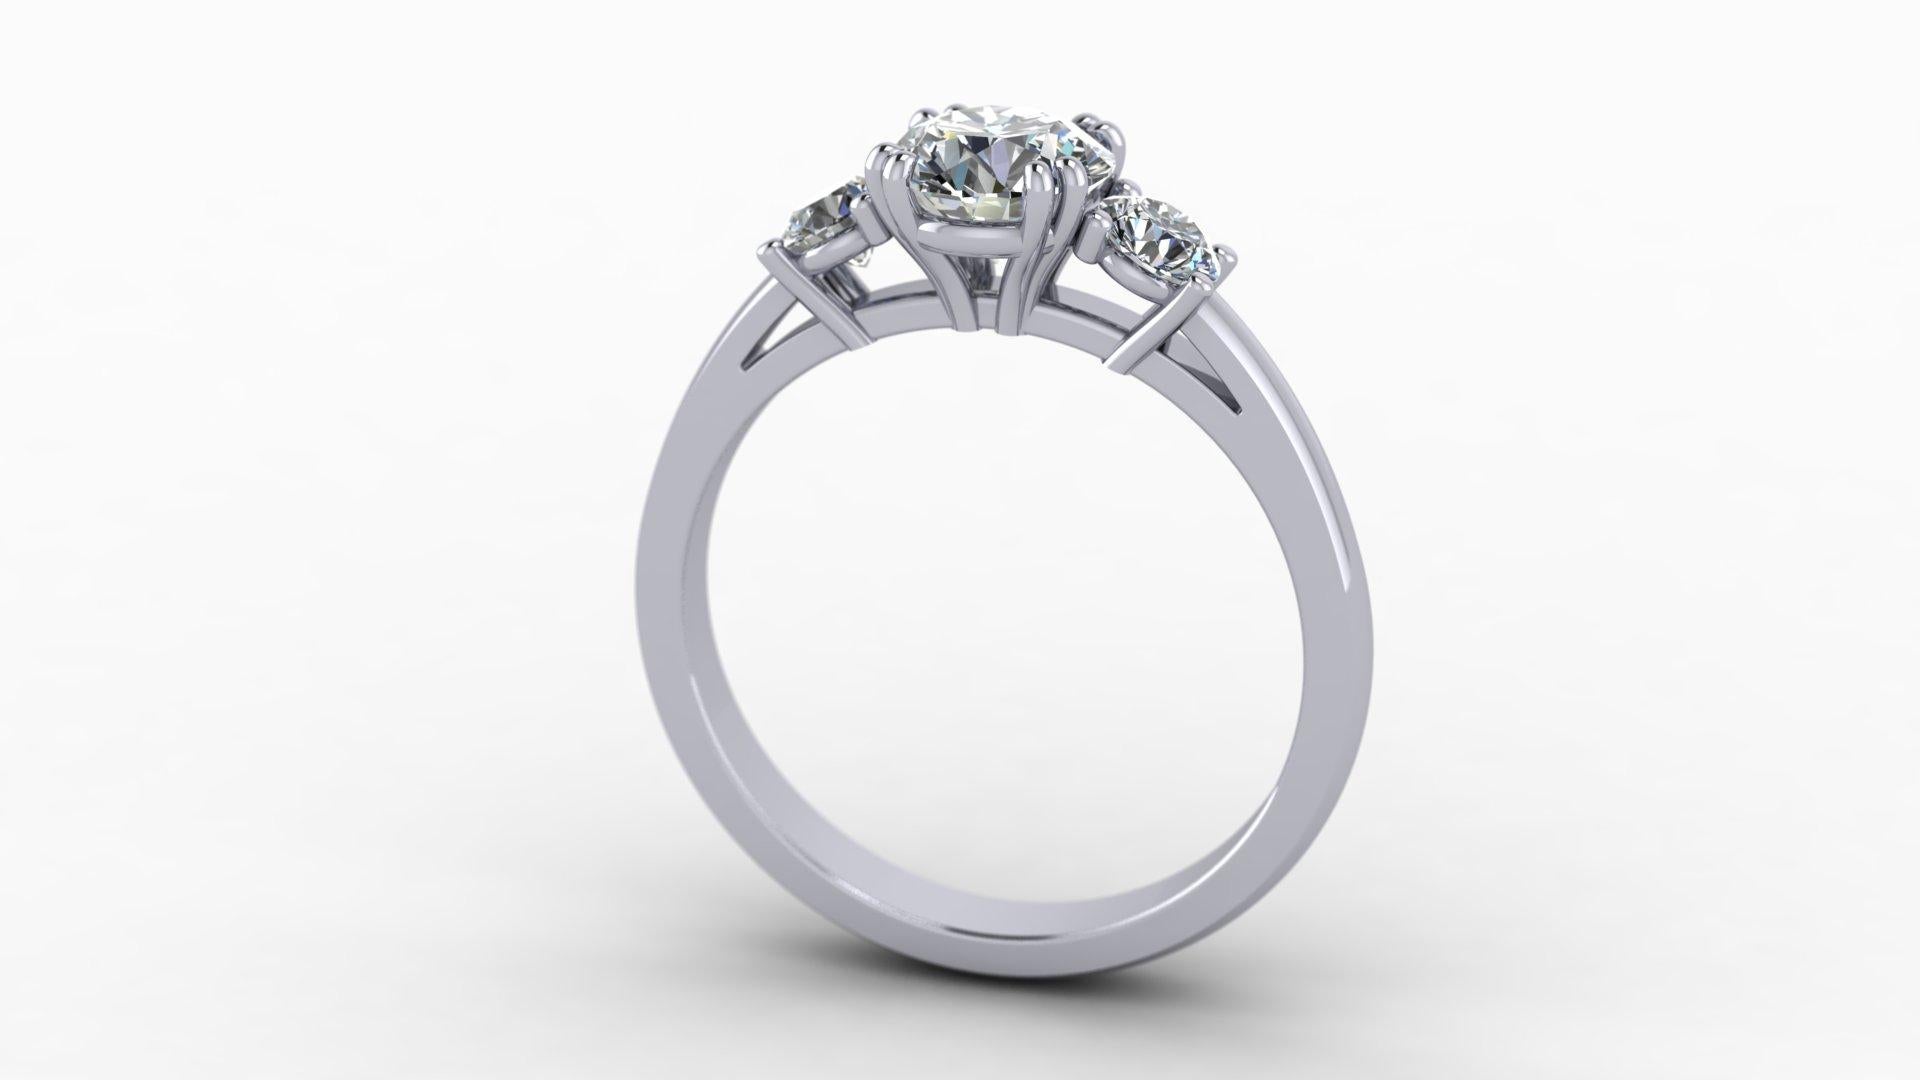 1 carat, round cut, E-VS2 centre stone (or bespoke, based on request), flanked with two 0.3 carat stones, mounted on platinum 950 band or 18k white gold.